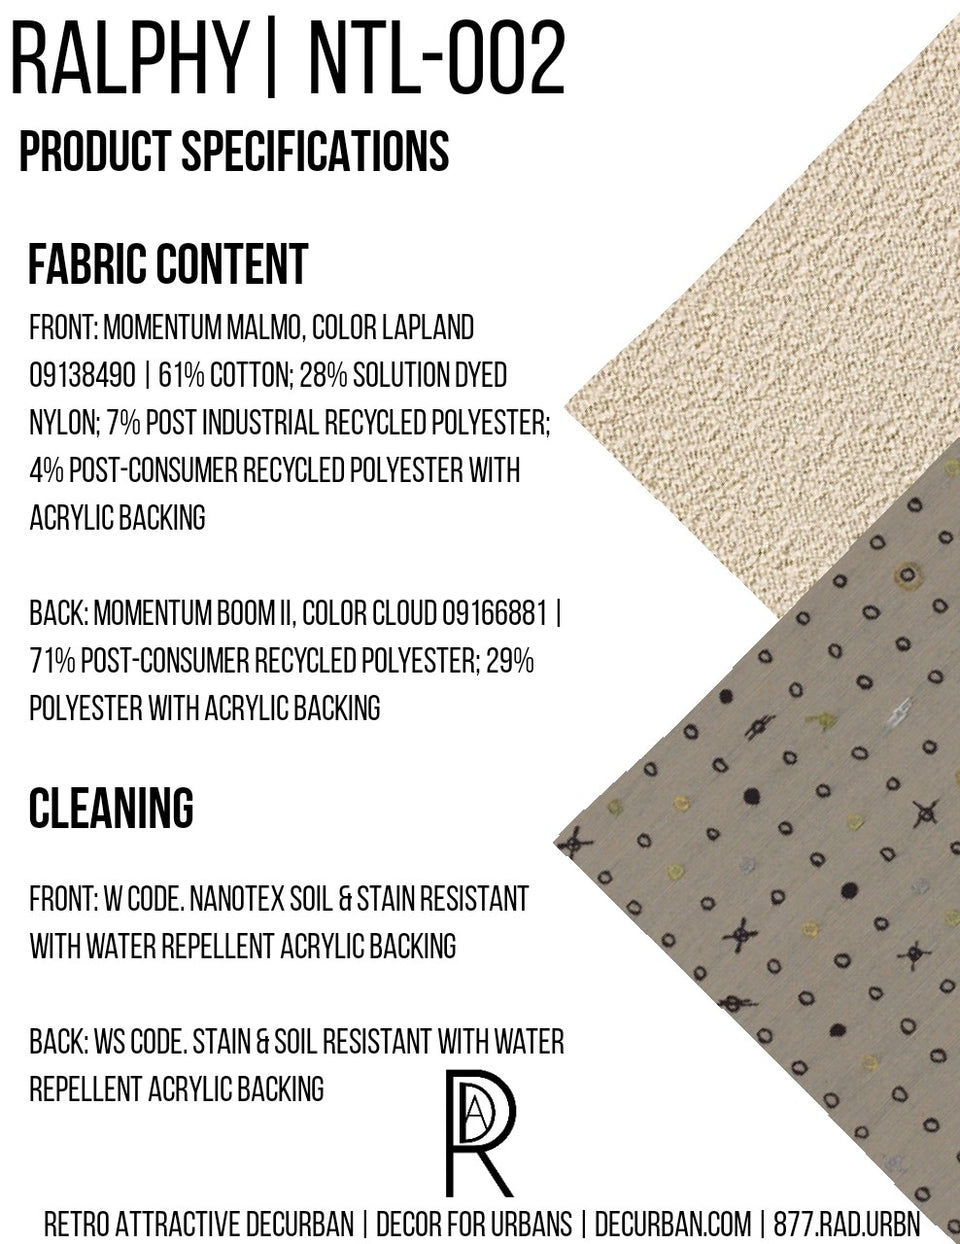 Decurban Ralphy Fabric Specification Sheet